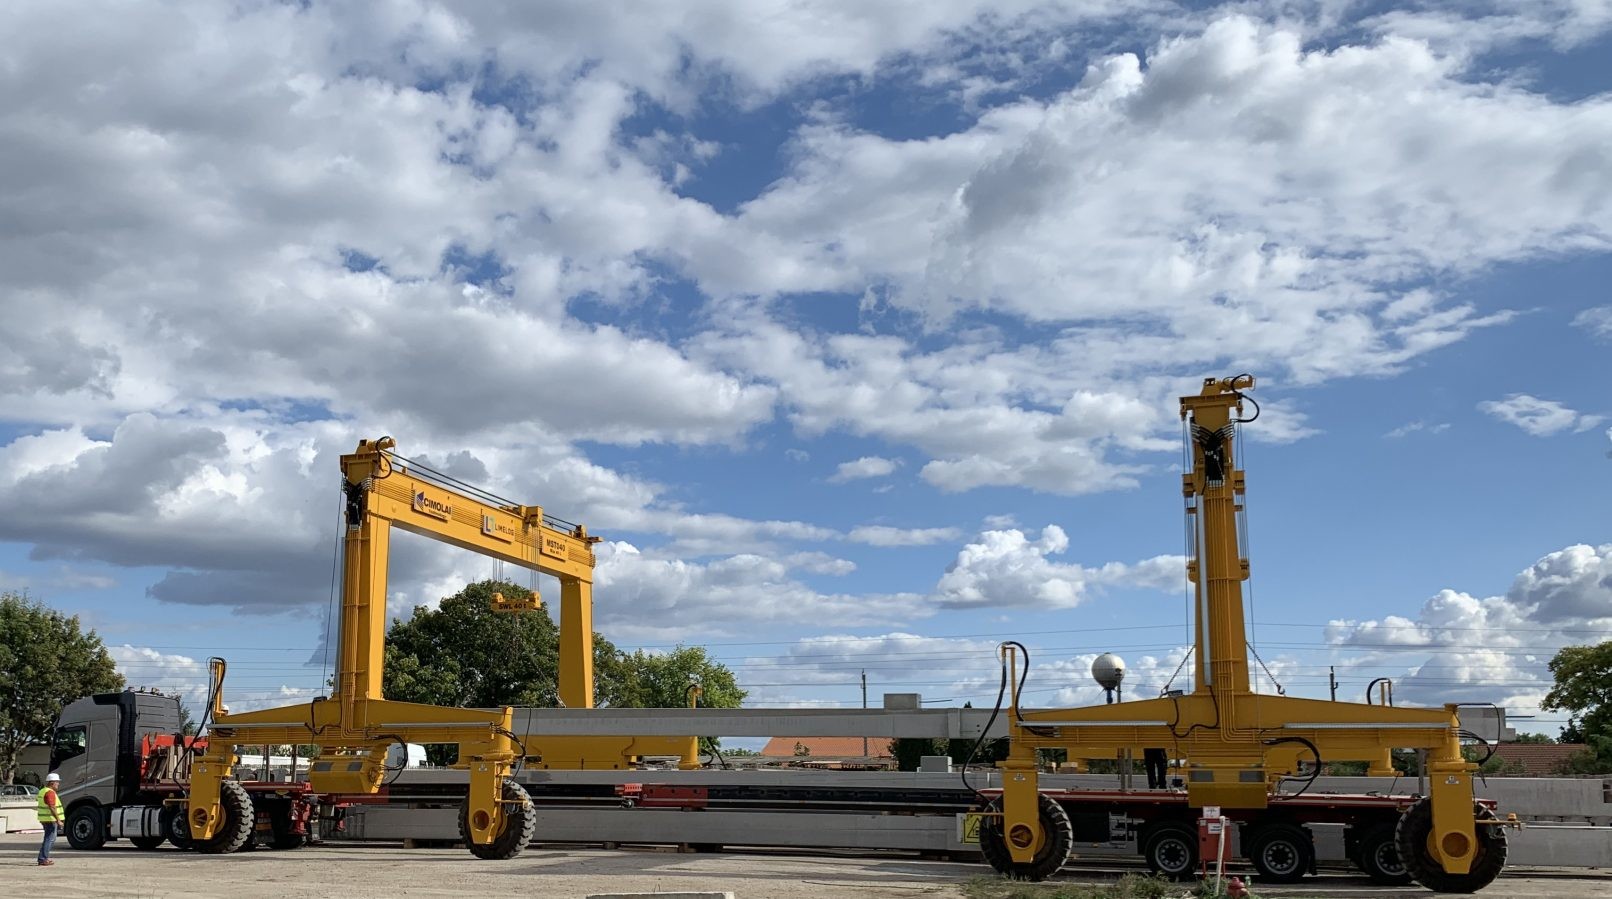 Double Beam Cranes 130 Ton/Each Working In Tandem with Special Spreader To Handle